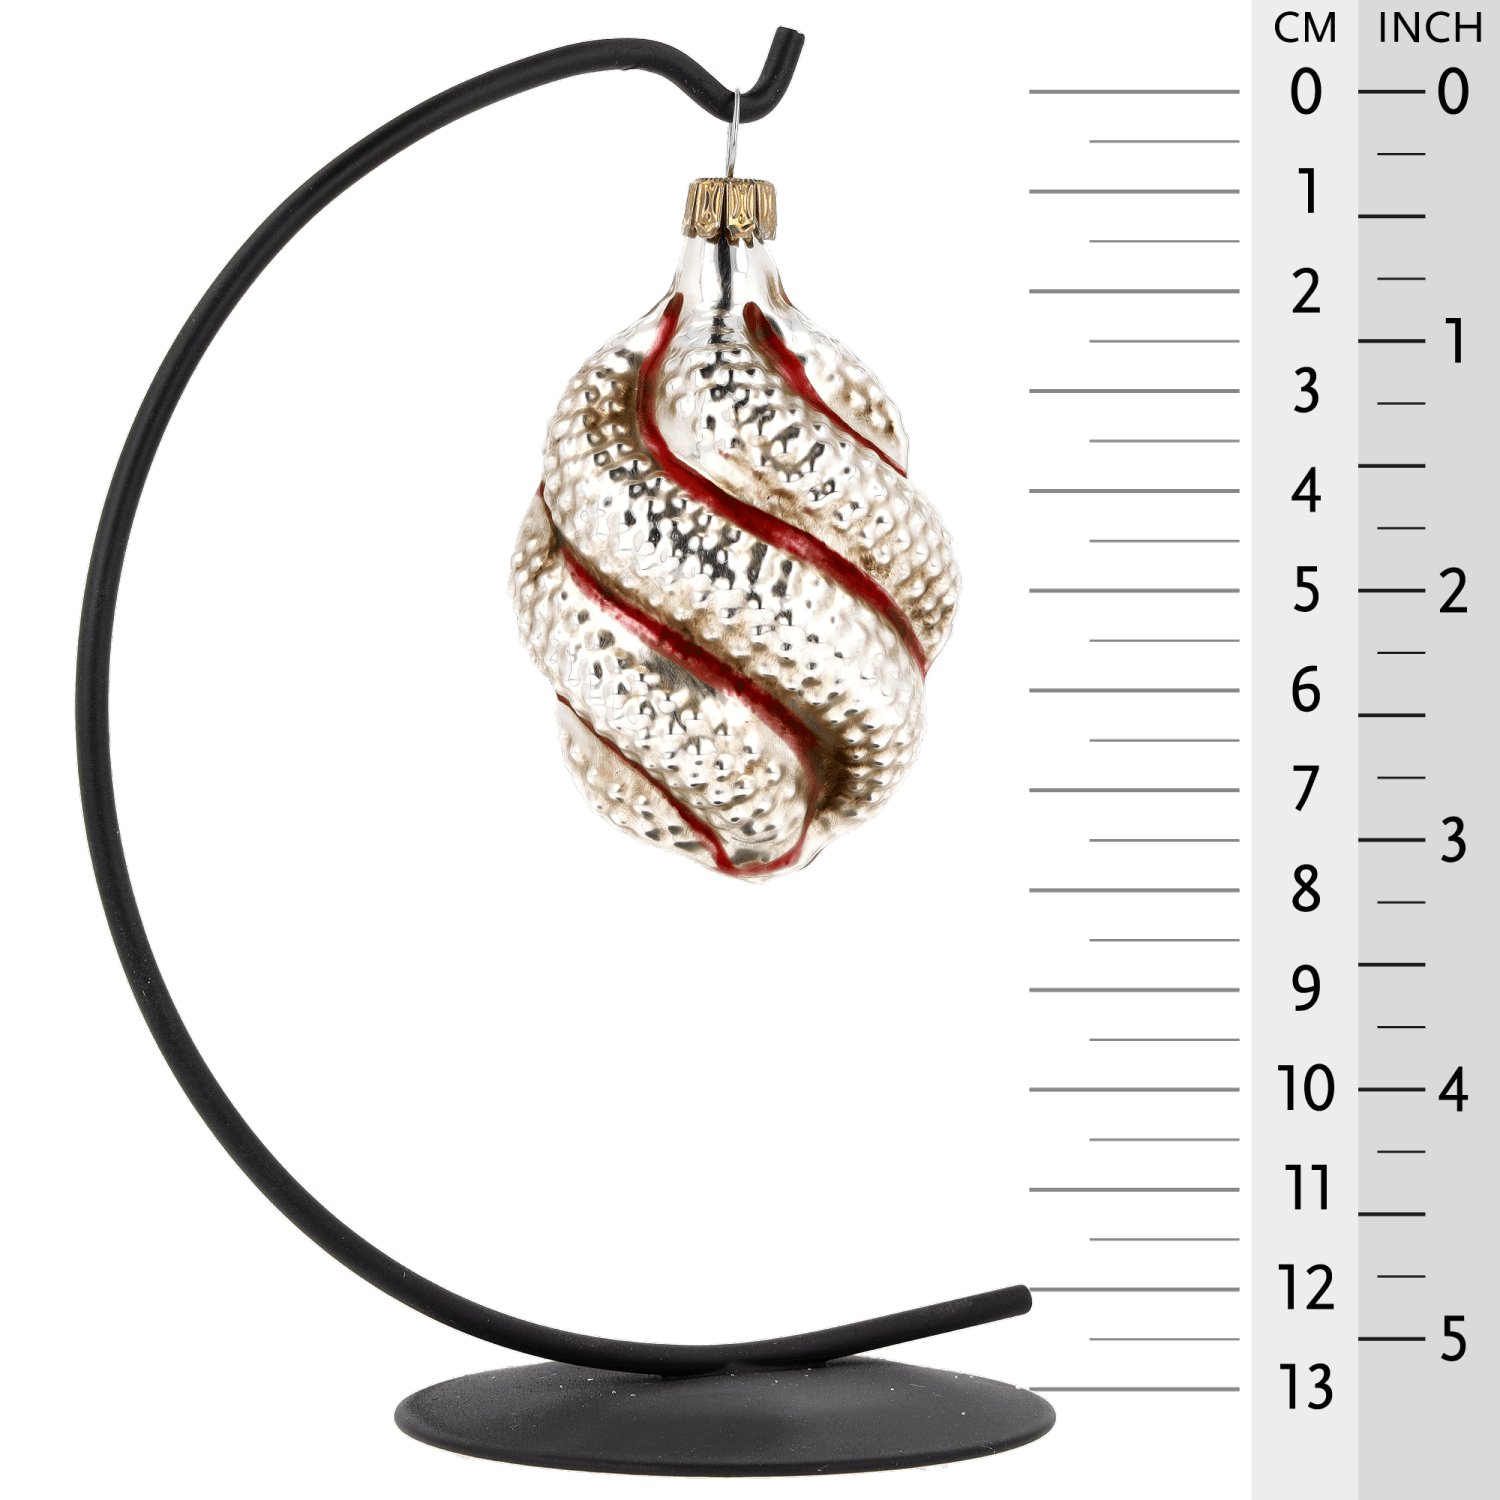 MAROLIN® - Glass ornament "Oval with red stripes"